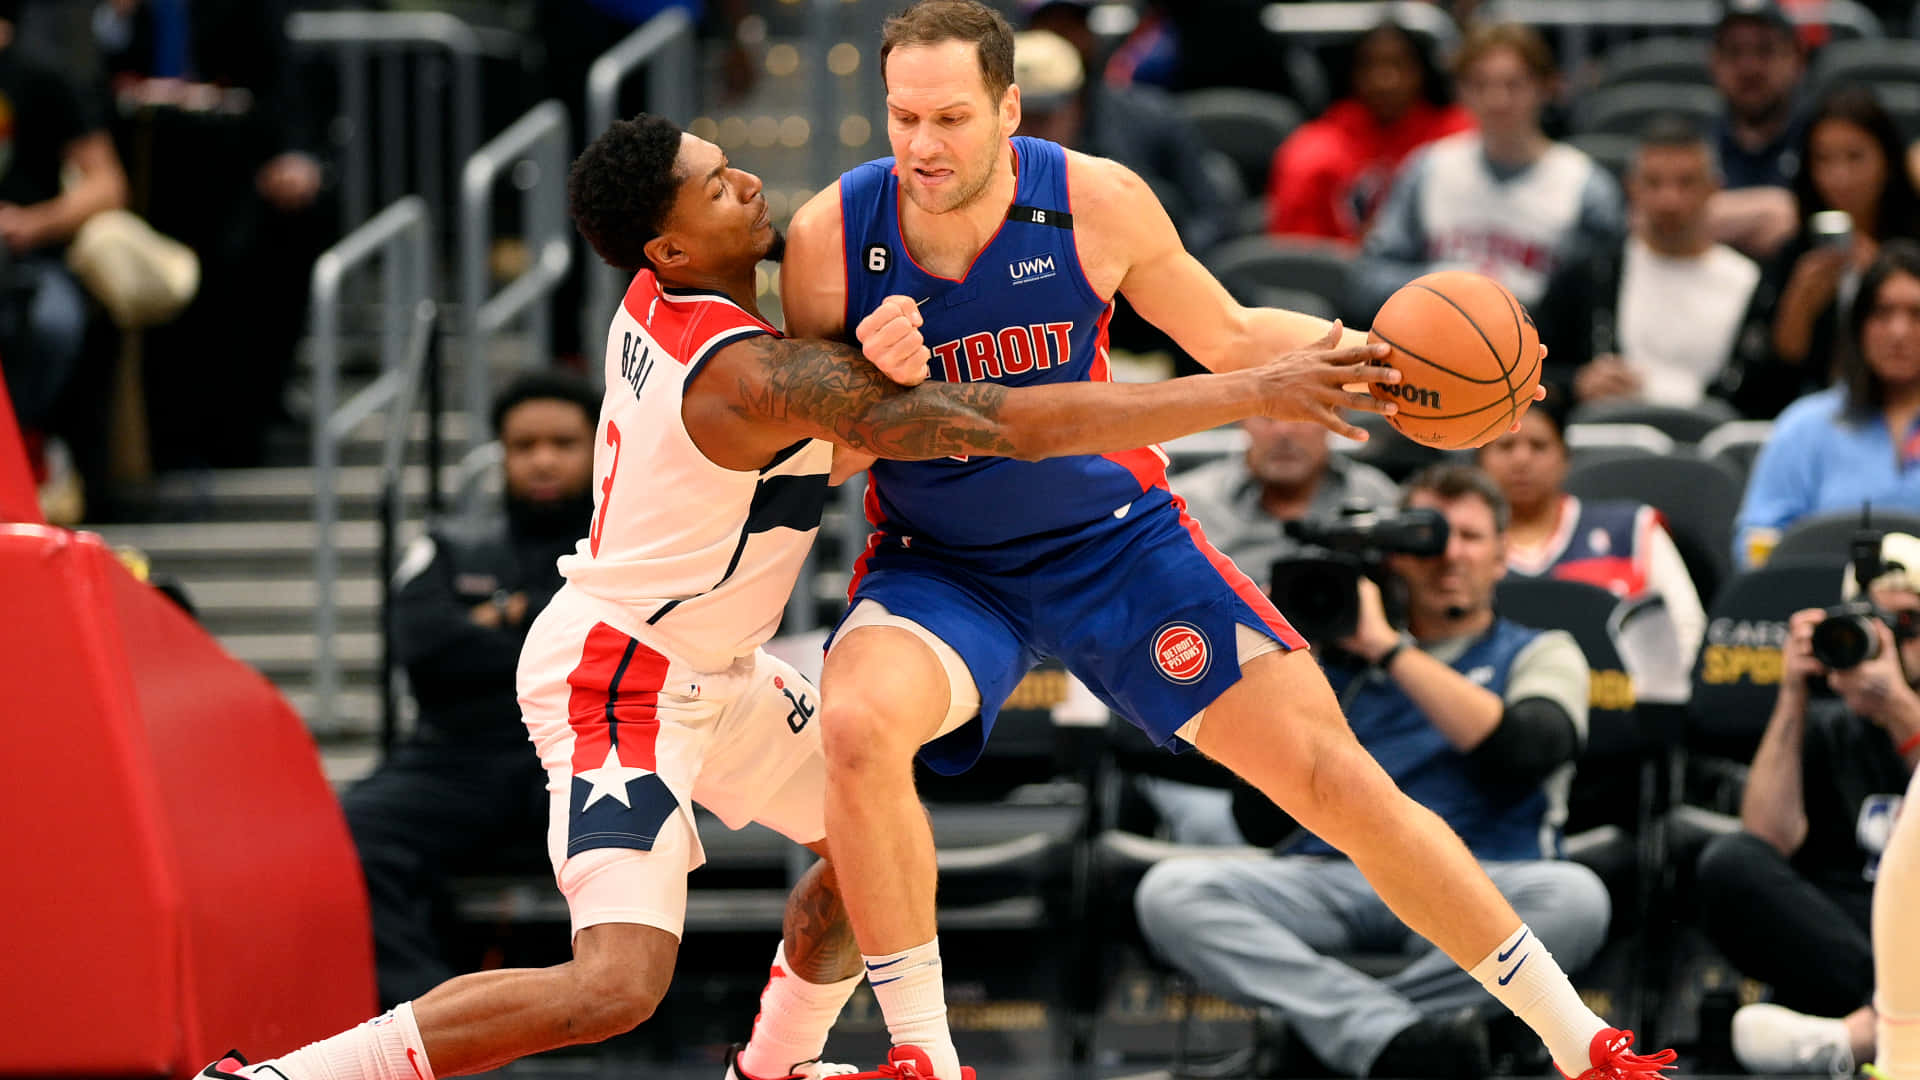 Nbadetroit Pistons Bojan Bogdanovic Does Not Play For The Detroit Pistons Team. He Currently Plays For The Utah Jazz In The Nba. Fondo de pantalla